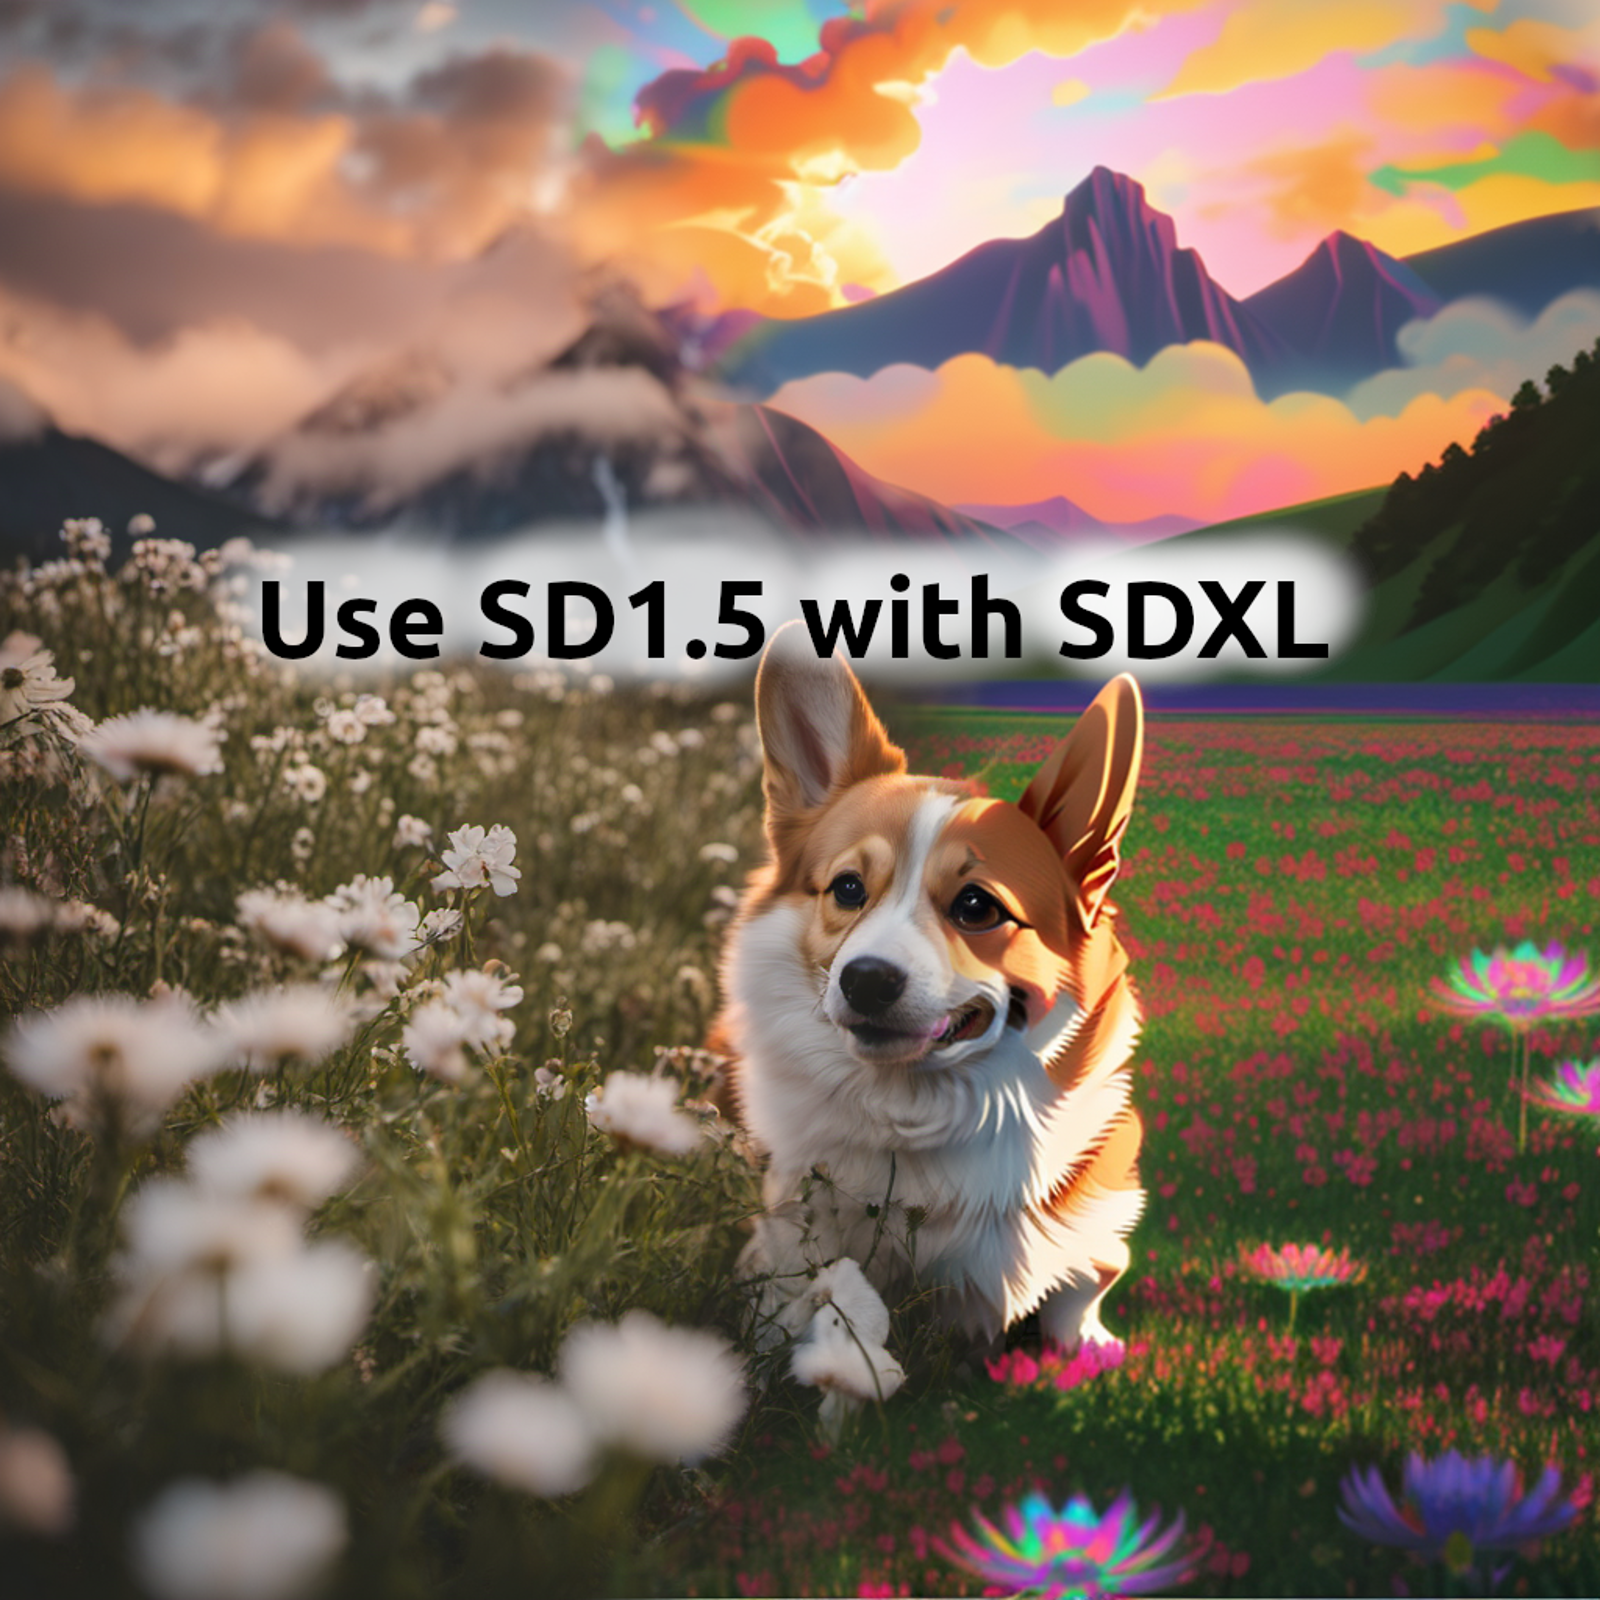 Applying SD 1.5 models and loras to SDXL (1024x1024, comfyui)